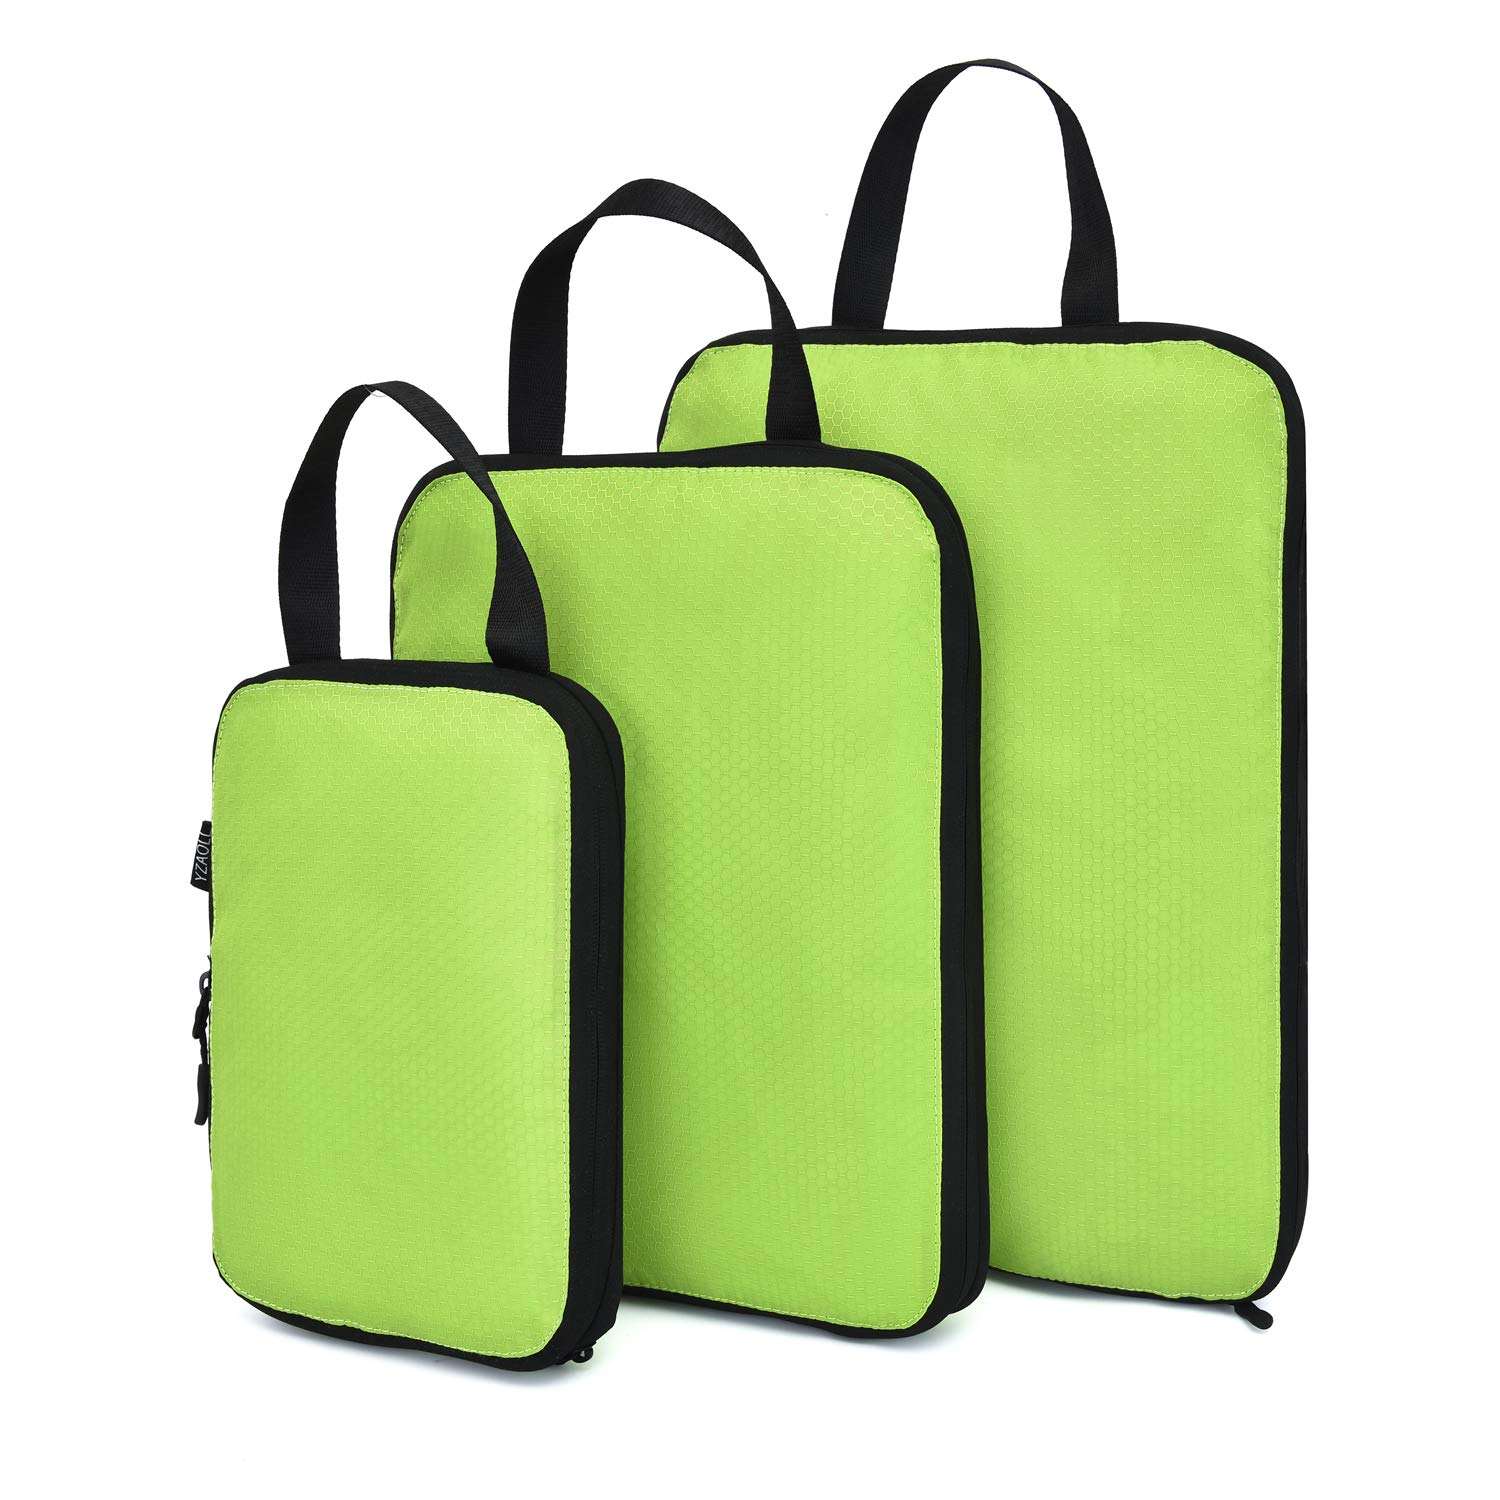 Luggage Packing Organizers Product Details